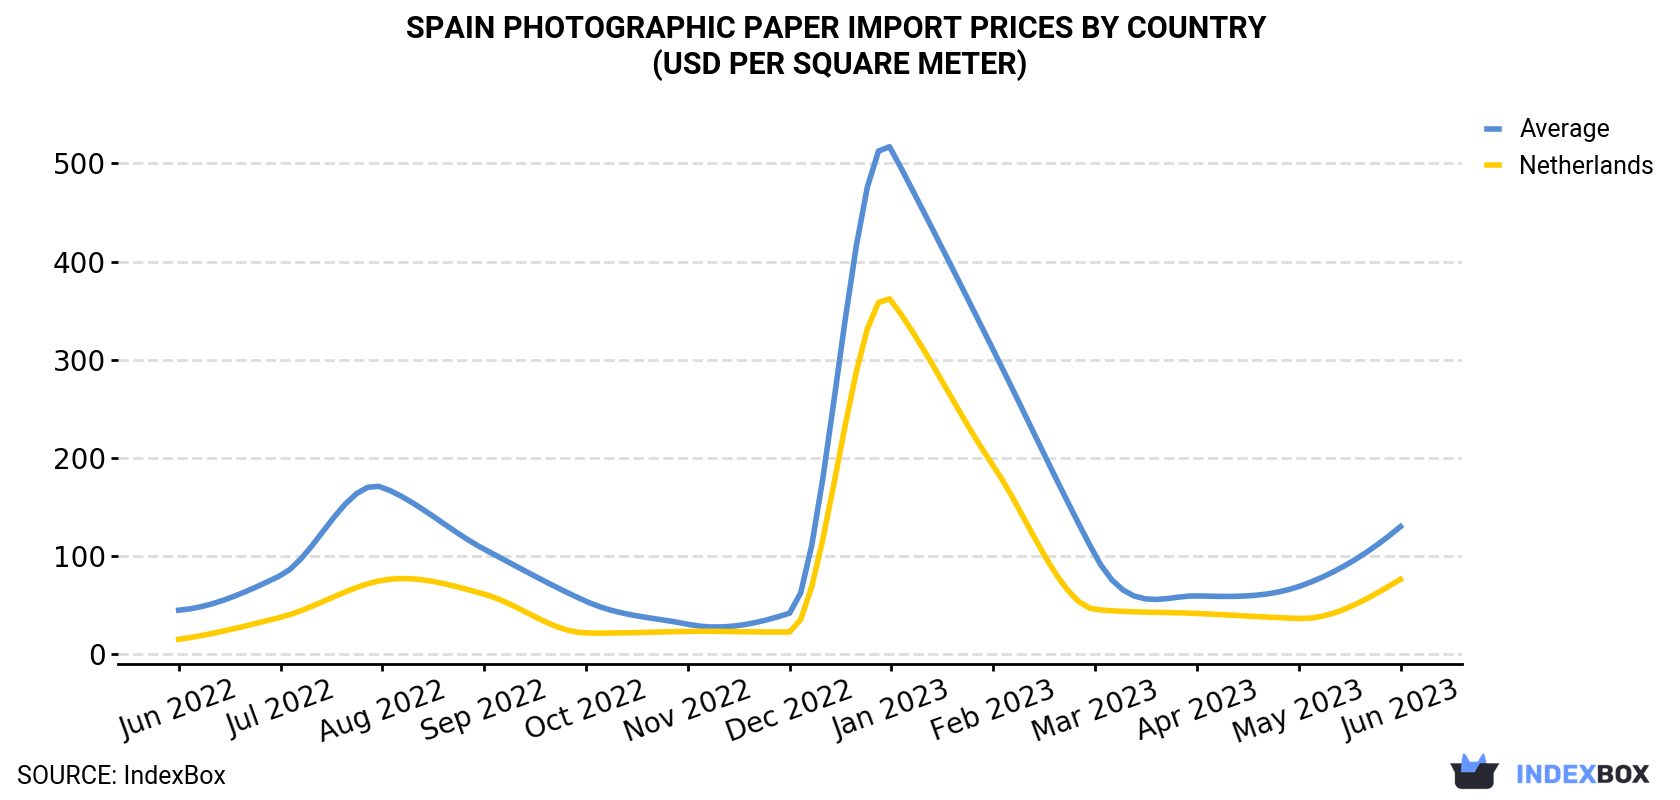 Spain Photographic Paper Import Prices By Country (USD Per Square Meter)